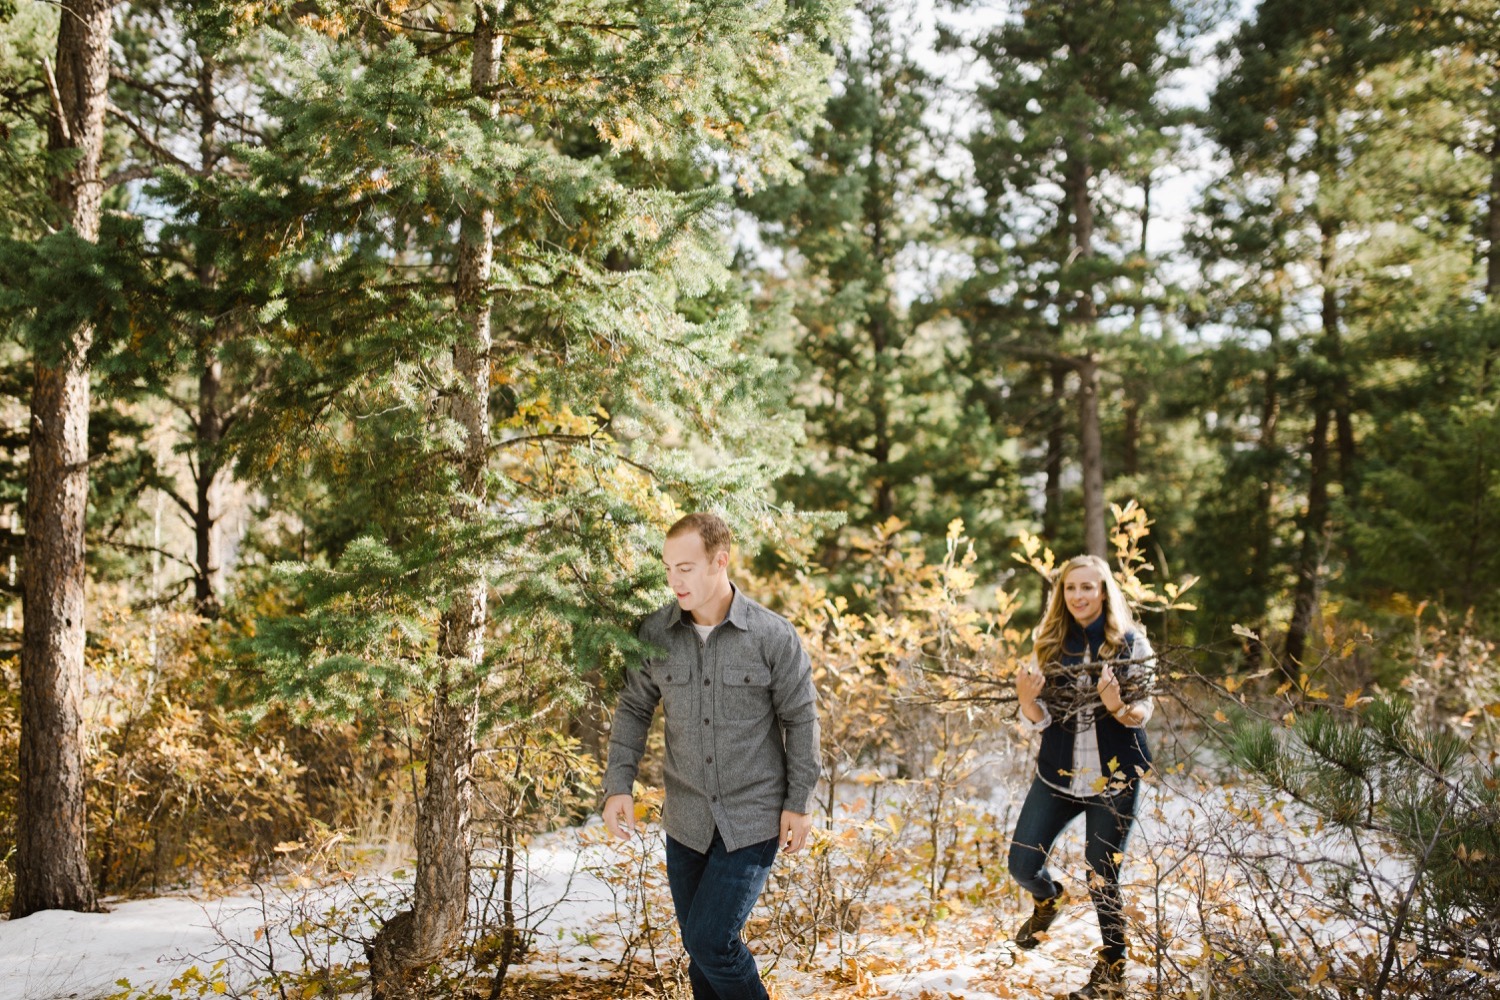 Kristen and Dan's Adventure Engagement Session told the story of them camping in the snow. Year round camping is an important part of their relationship and we wanted to honor that in the story. Photo by Ali and Garrett, Romantic, Adventurous, Nostalgic Wedding Photographers.